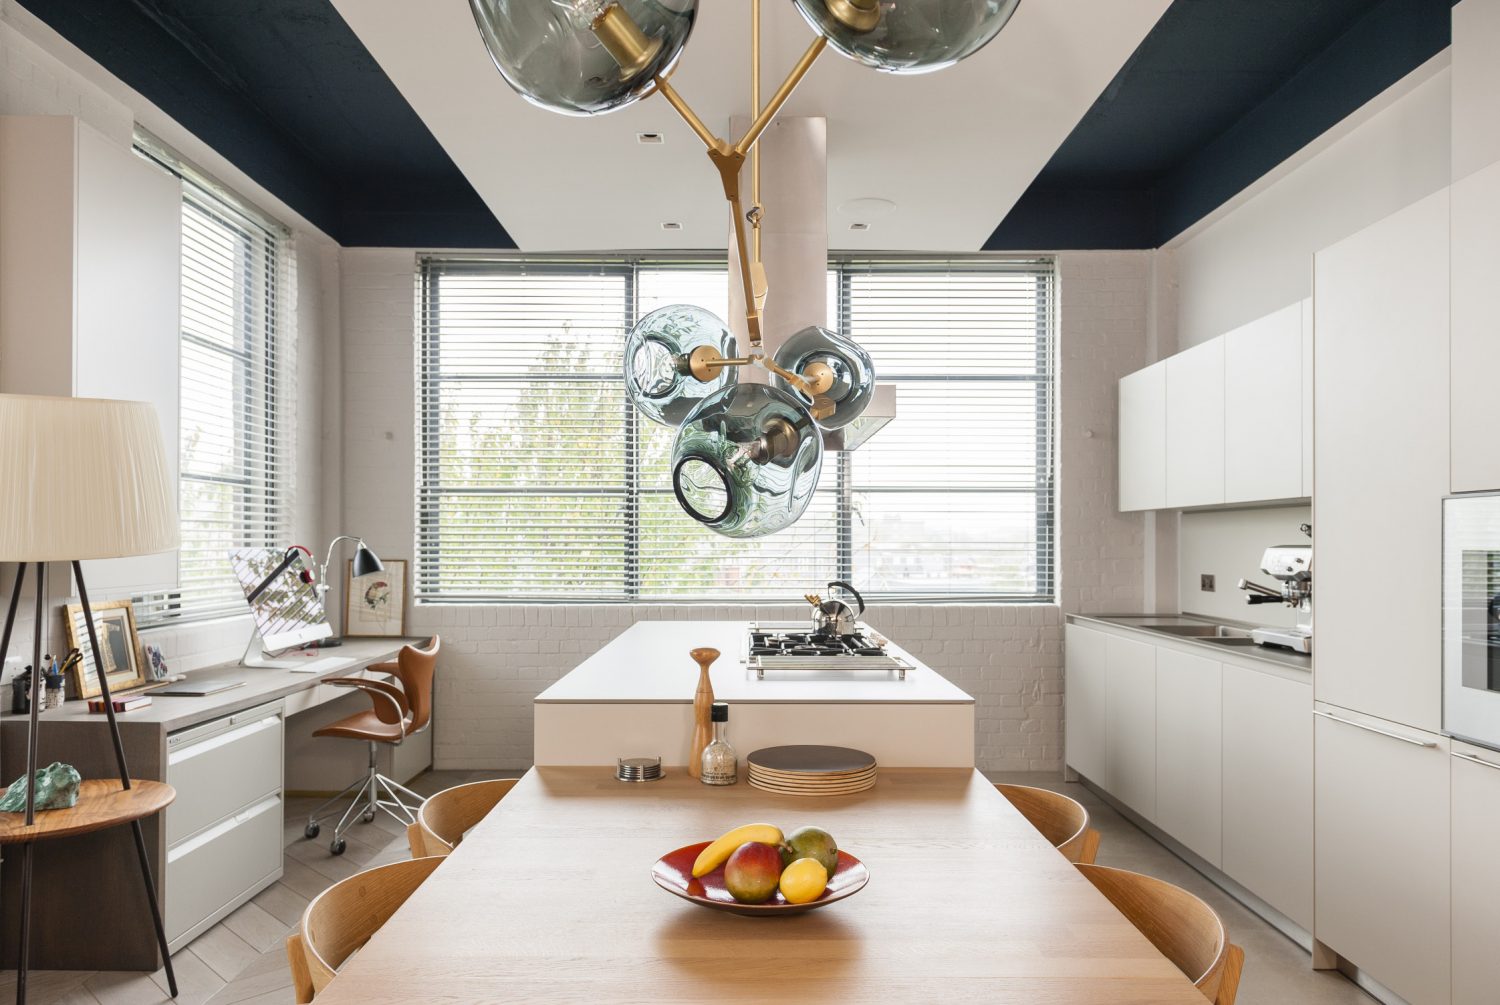 The kitchen, with its sculptural chandelier by Lyndsey Adelman, blends seamlessly into the living room. Adjacent to the kitchen, a desk unit acts as a home office